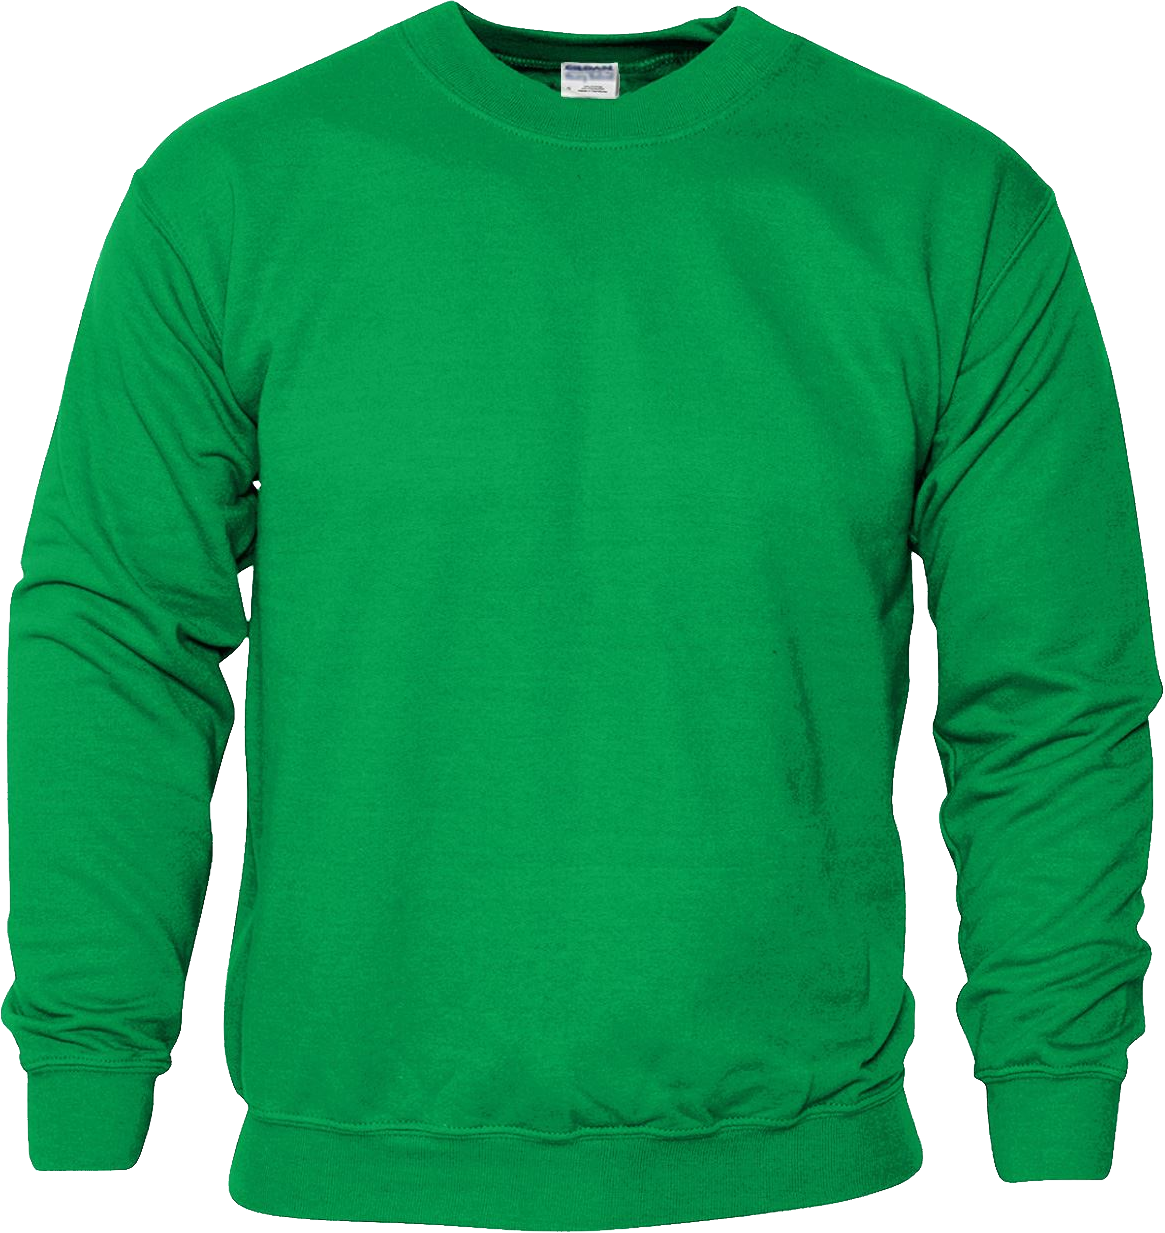 Jumper Sweater PNG Pic